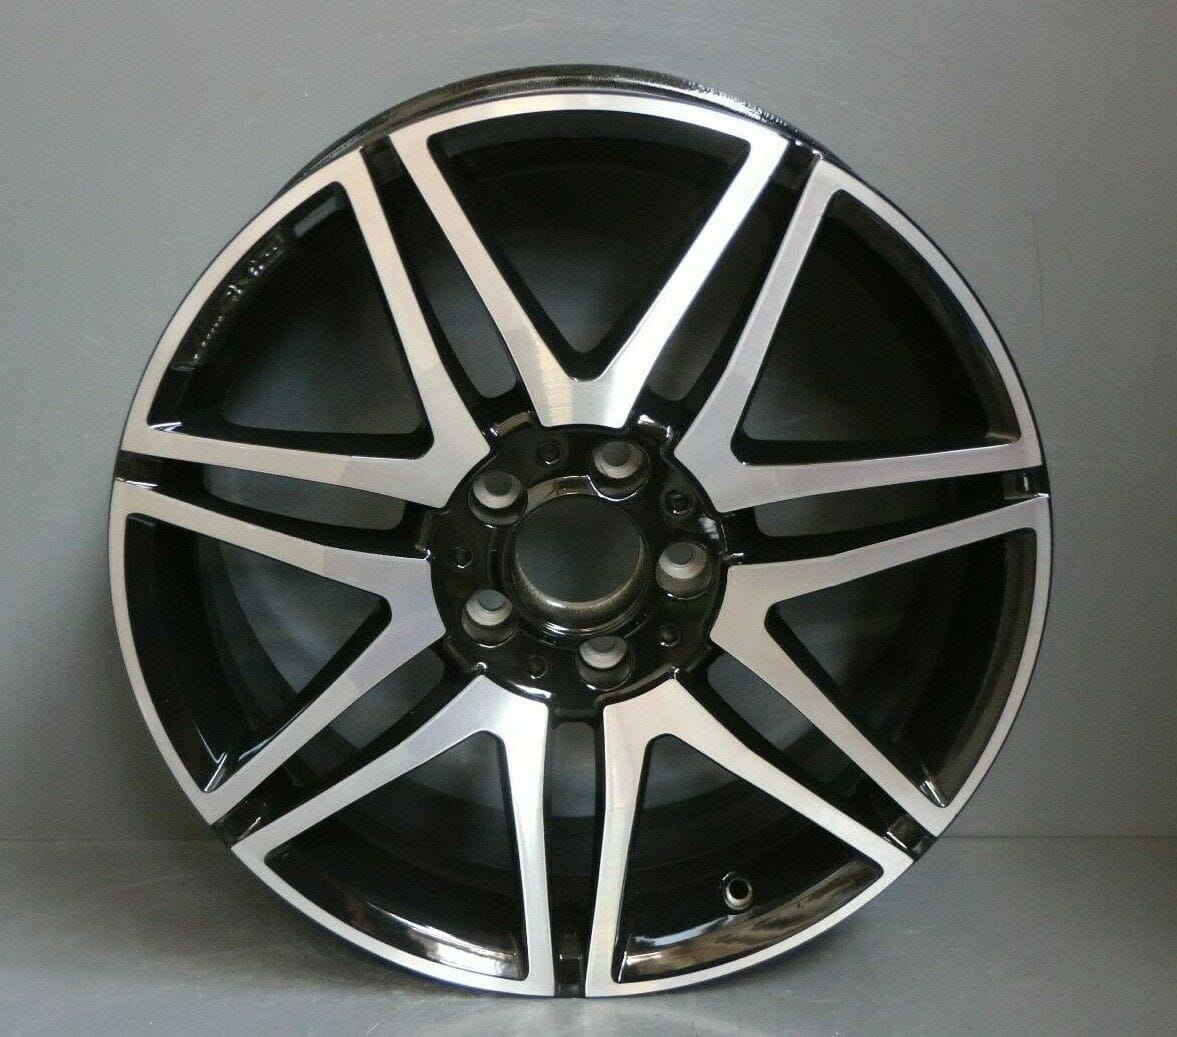 Wheels and Tires/Axles - 1 GENUINE OEM MERCEDES C CLASS W204 18" FRONT ALLOY WHEEL RIM A2044010604 - Used - 2012 to 2014 Mercedes-Benz C300 - Munster, IN 46321, United States